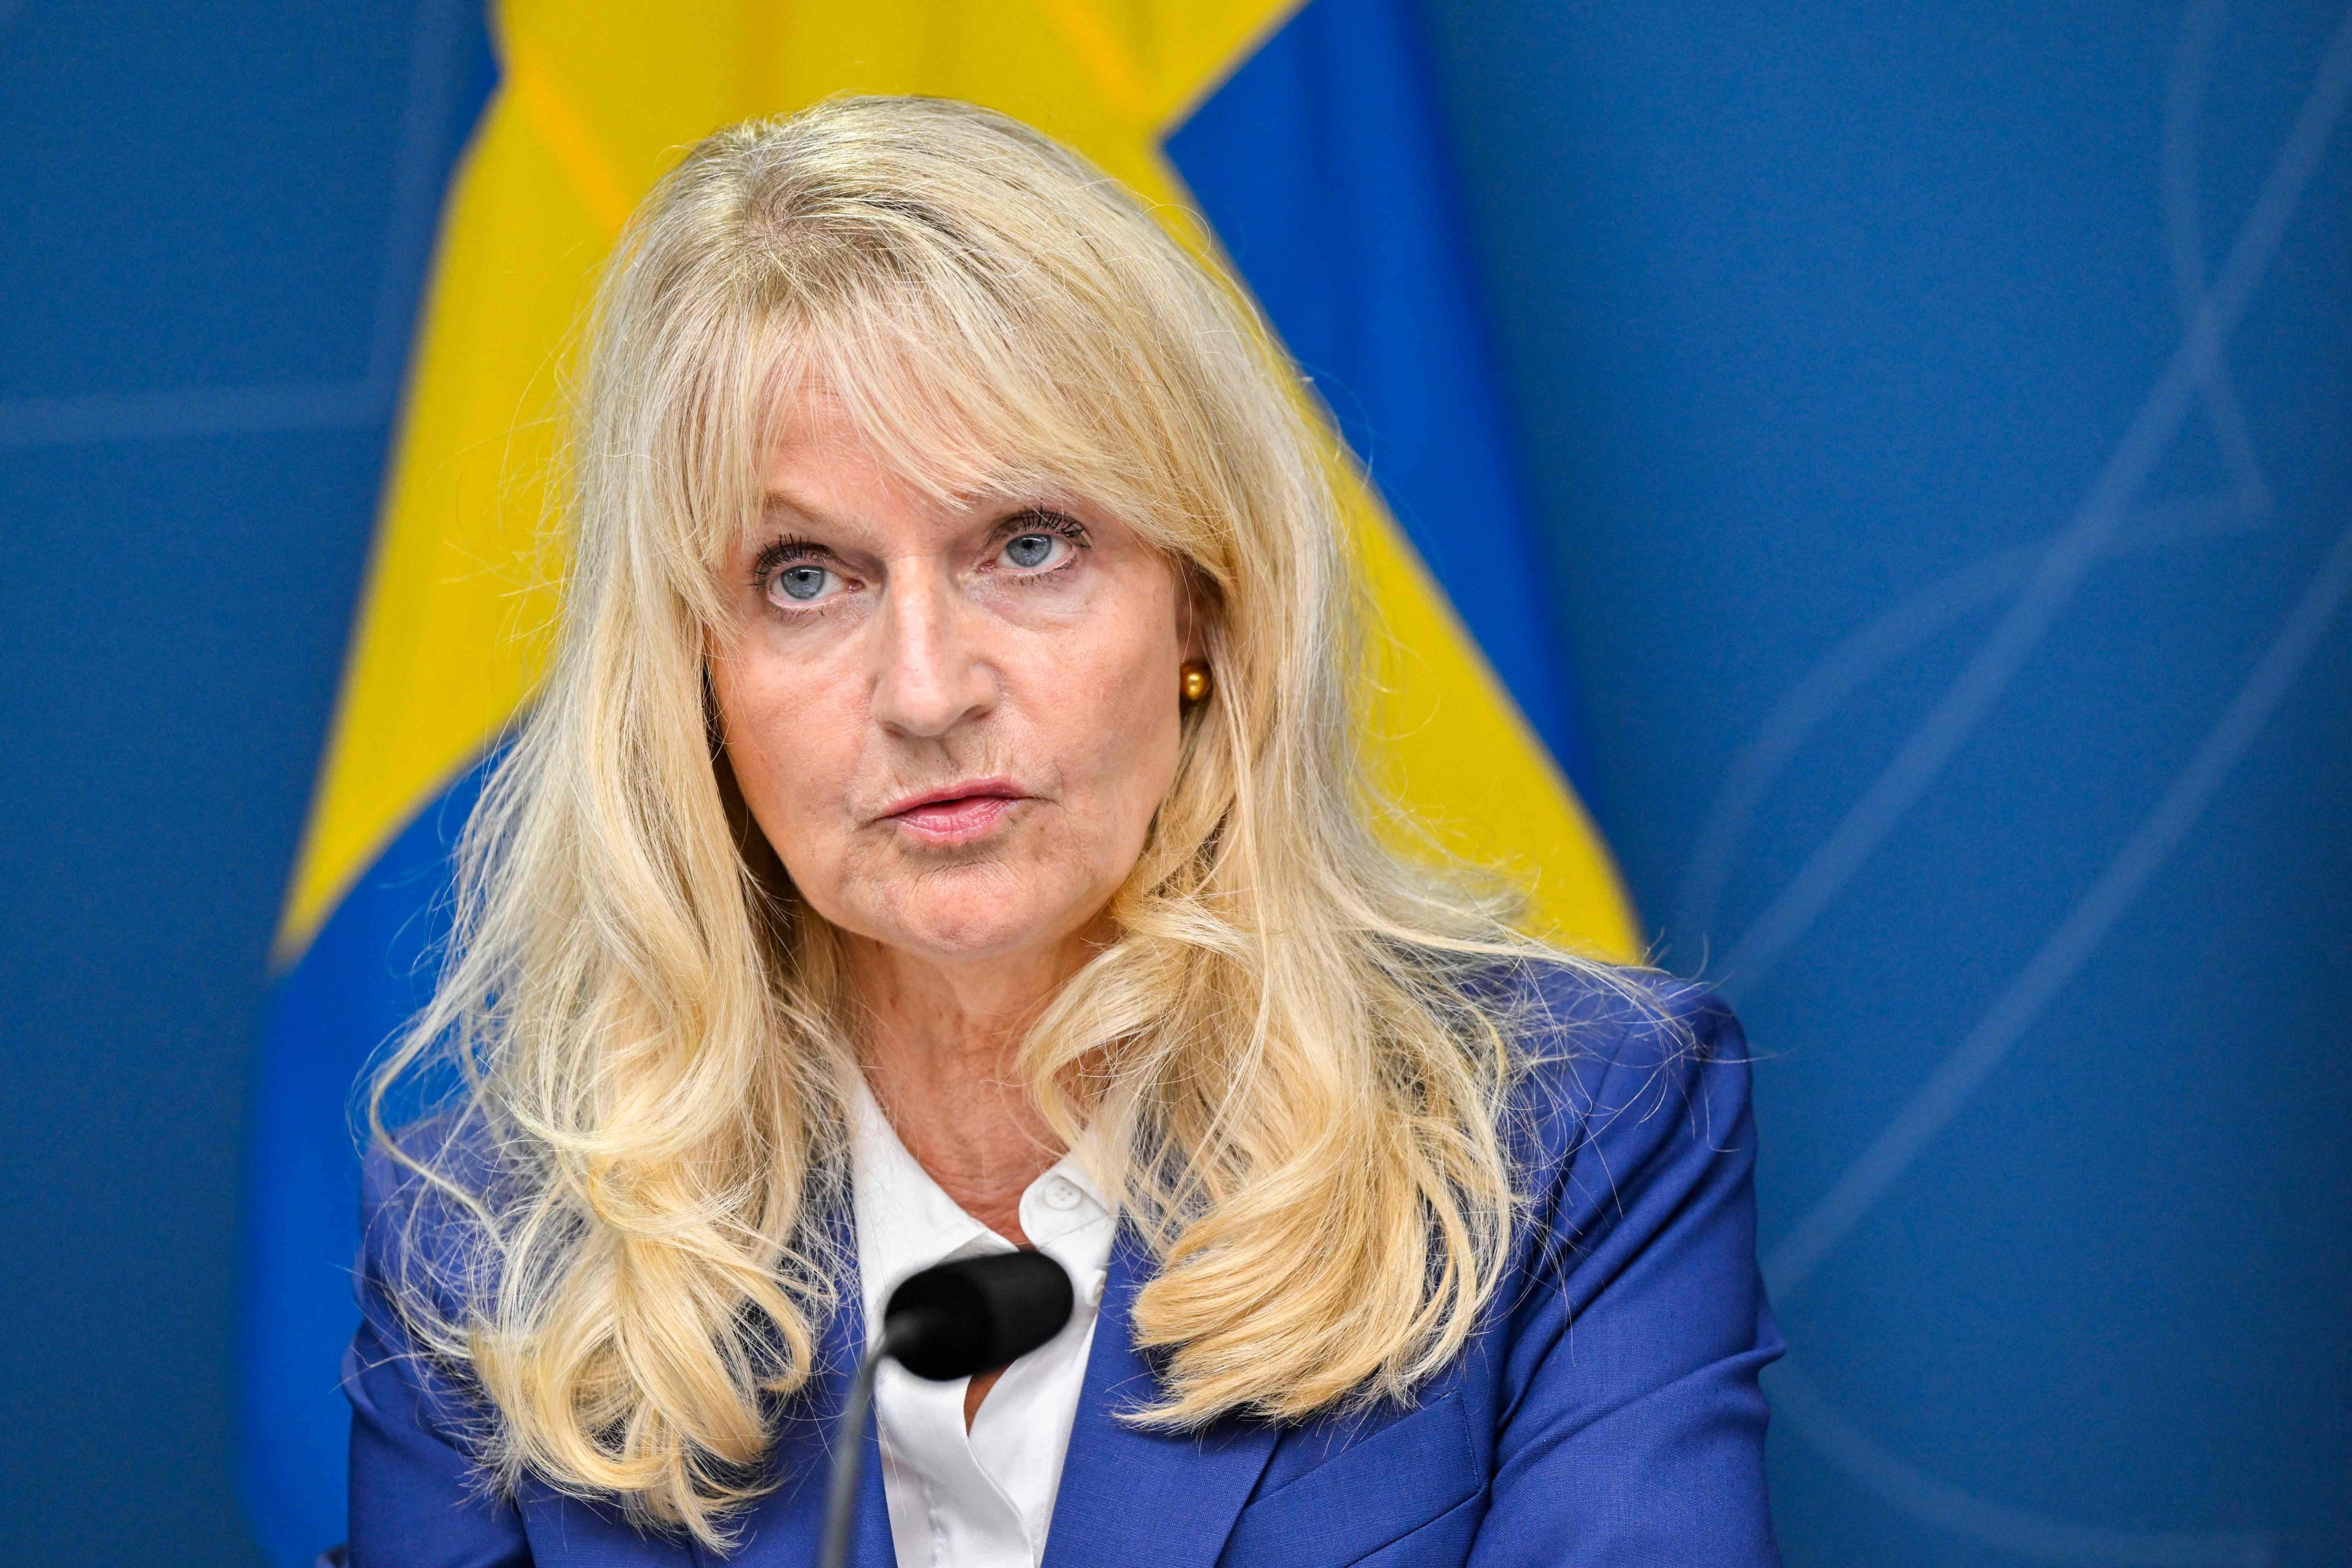 Sweden’s Security Police Chief Charlotte von Essen addresses a press conference as the terror threat level in Sweden is raised. Photo: AFP